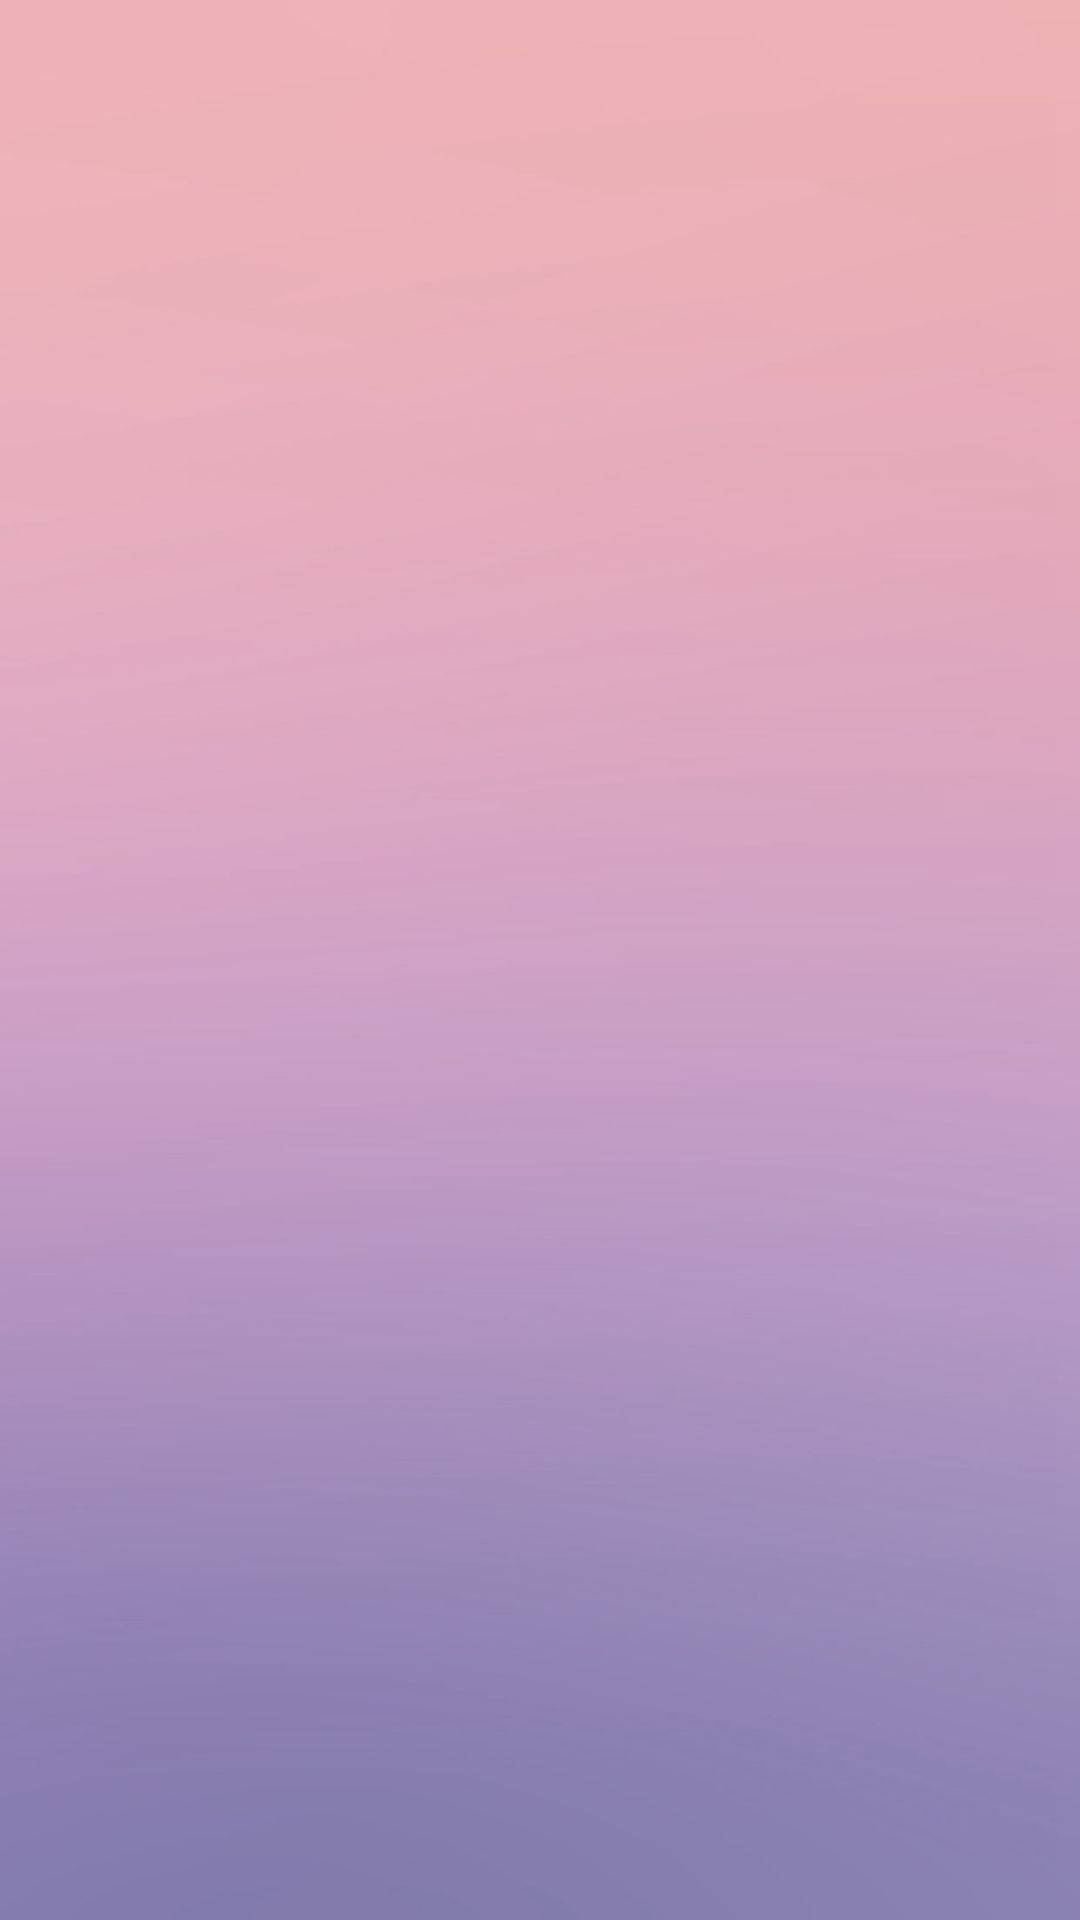 Soft Pink And Blue Gradient Wallpaper